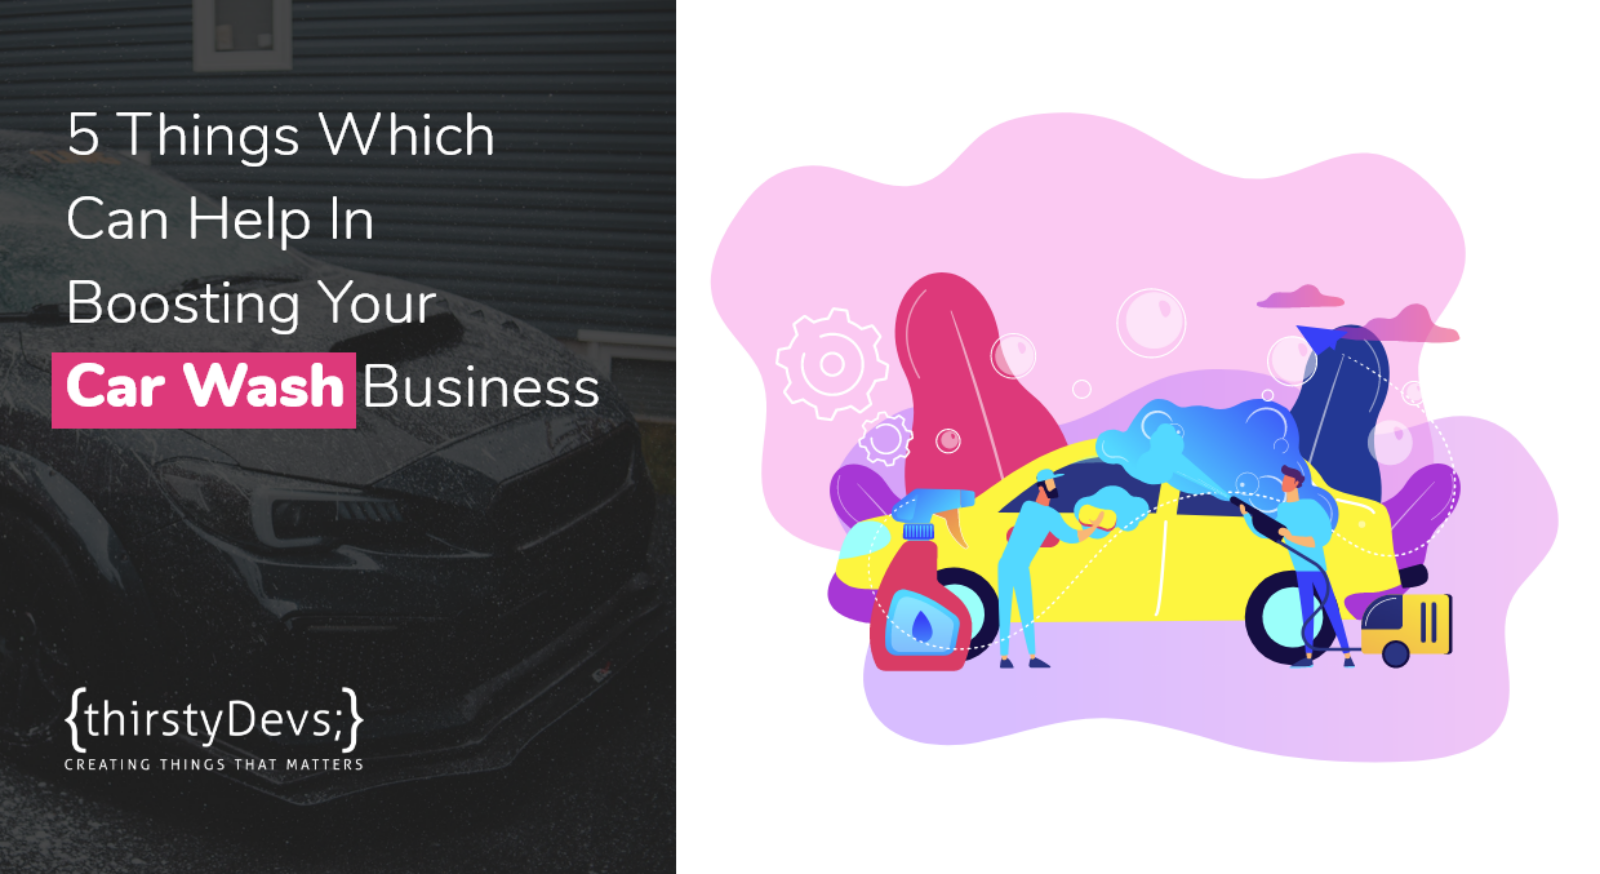 How to Boost your Car Wash Business with Car Wash App by thirstyDevs